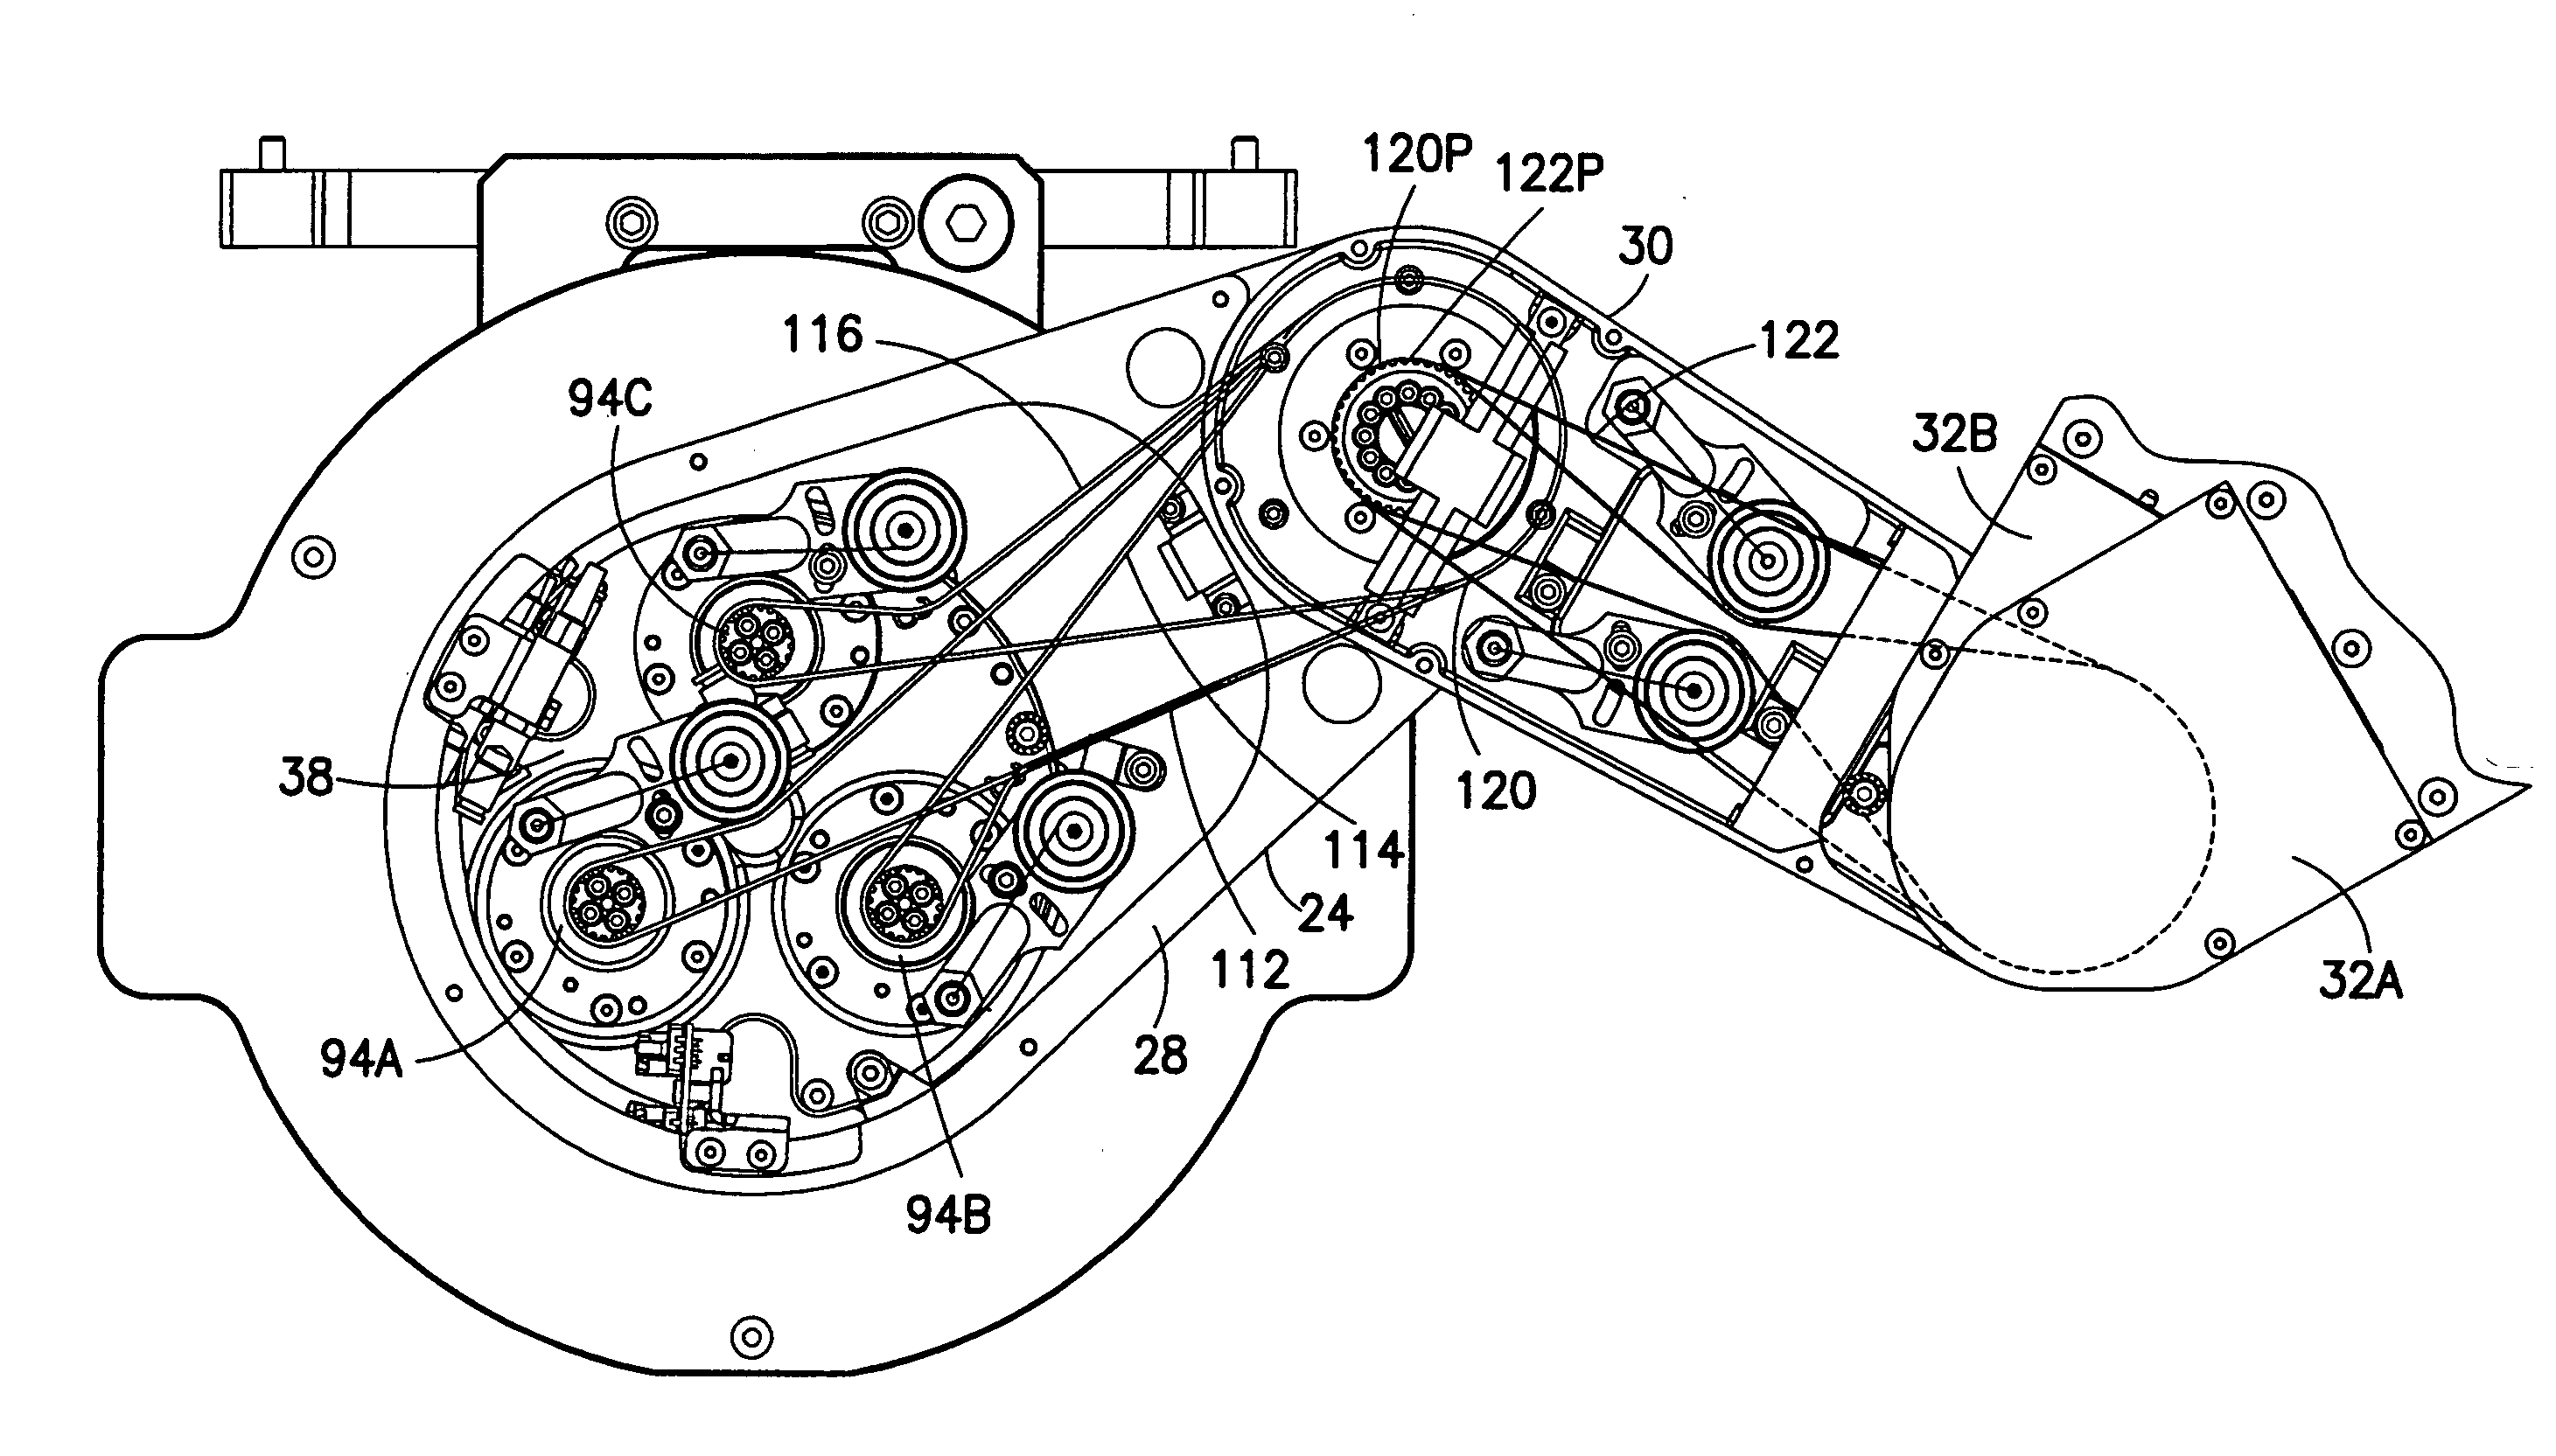 Substrate transport apparatus